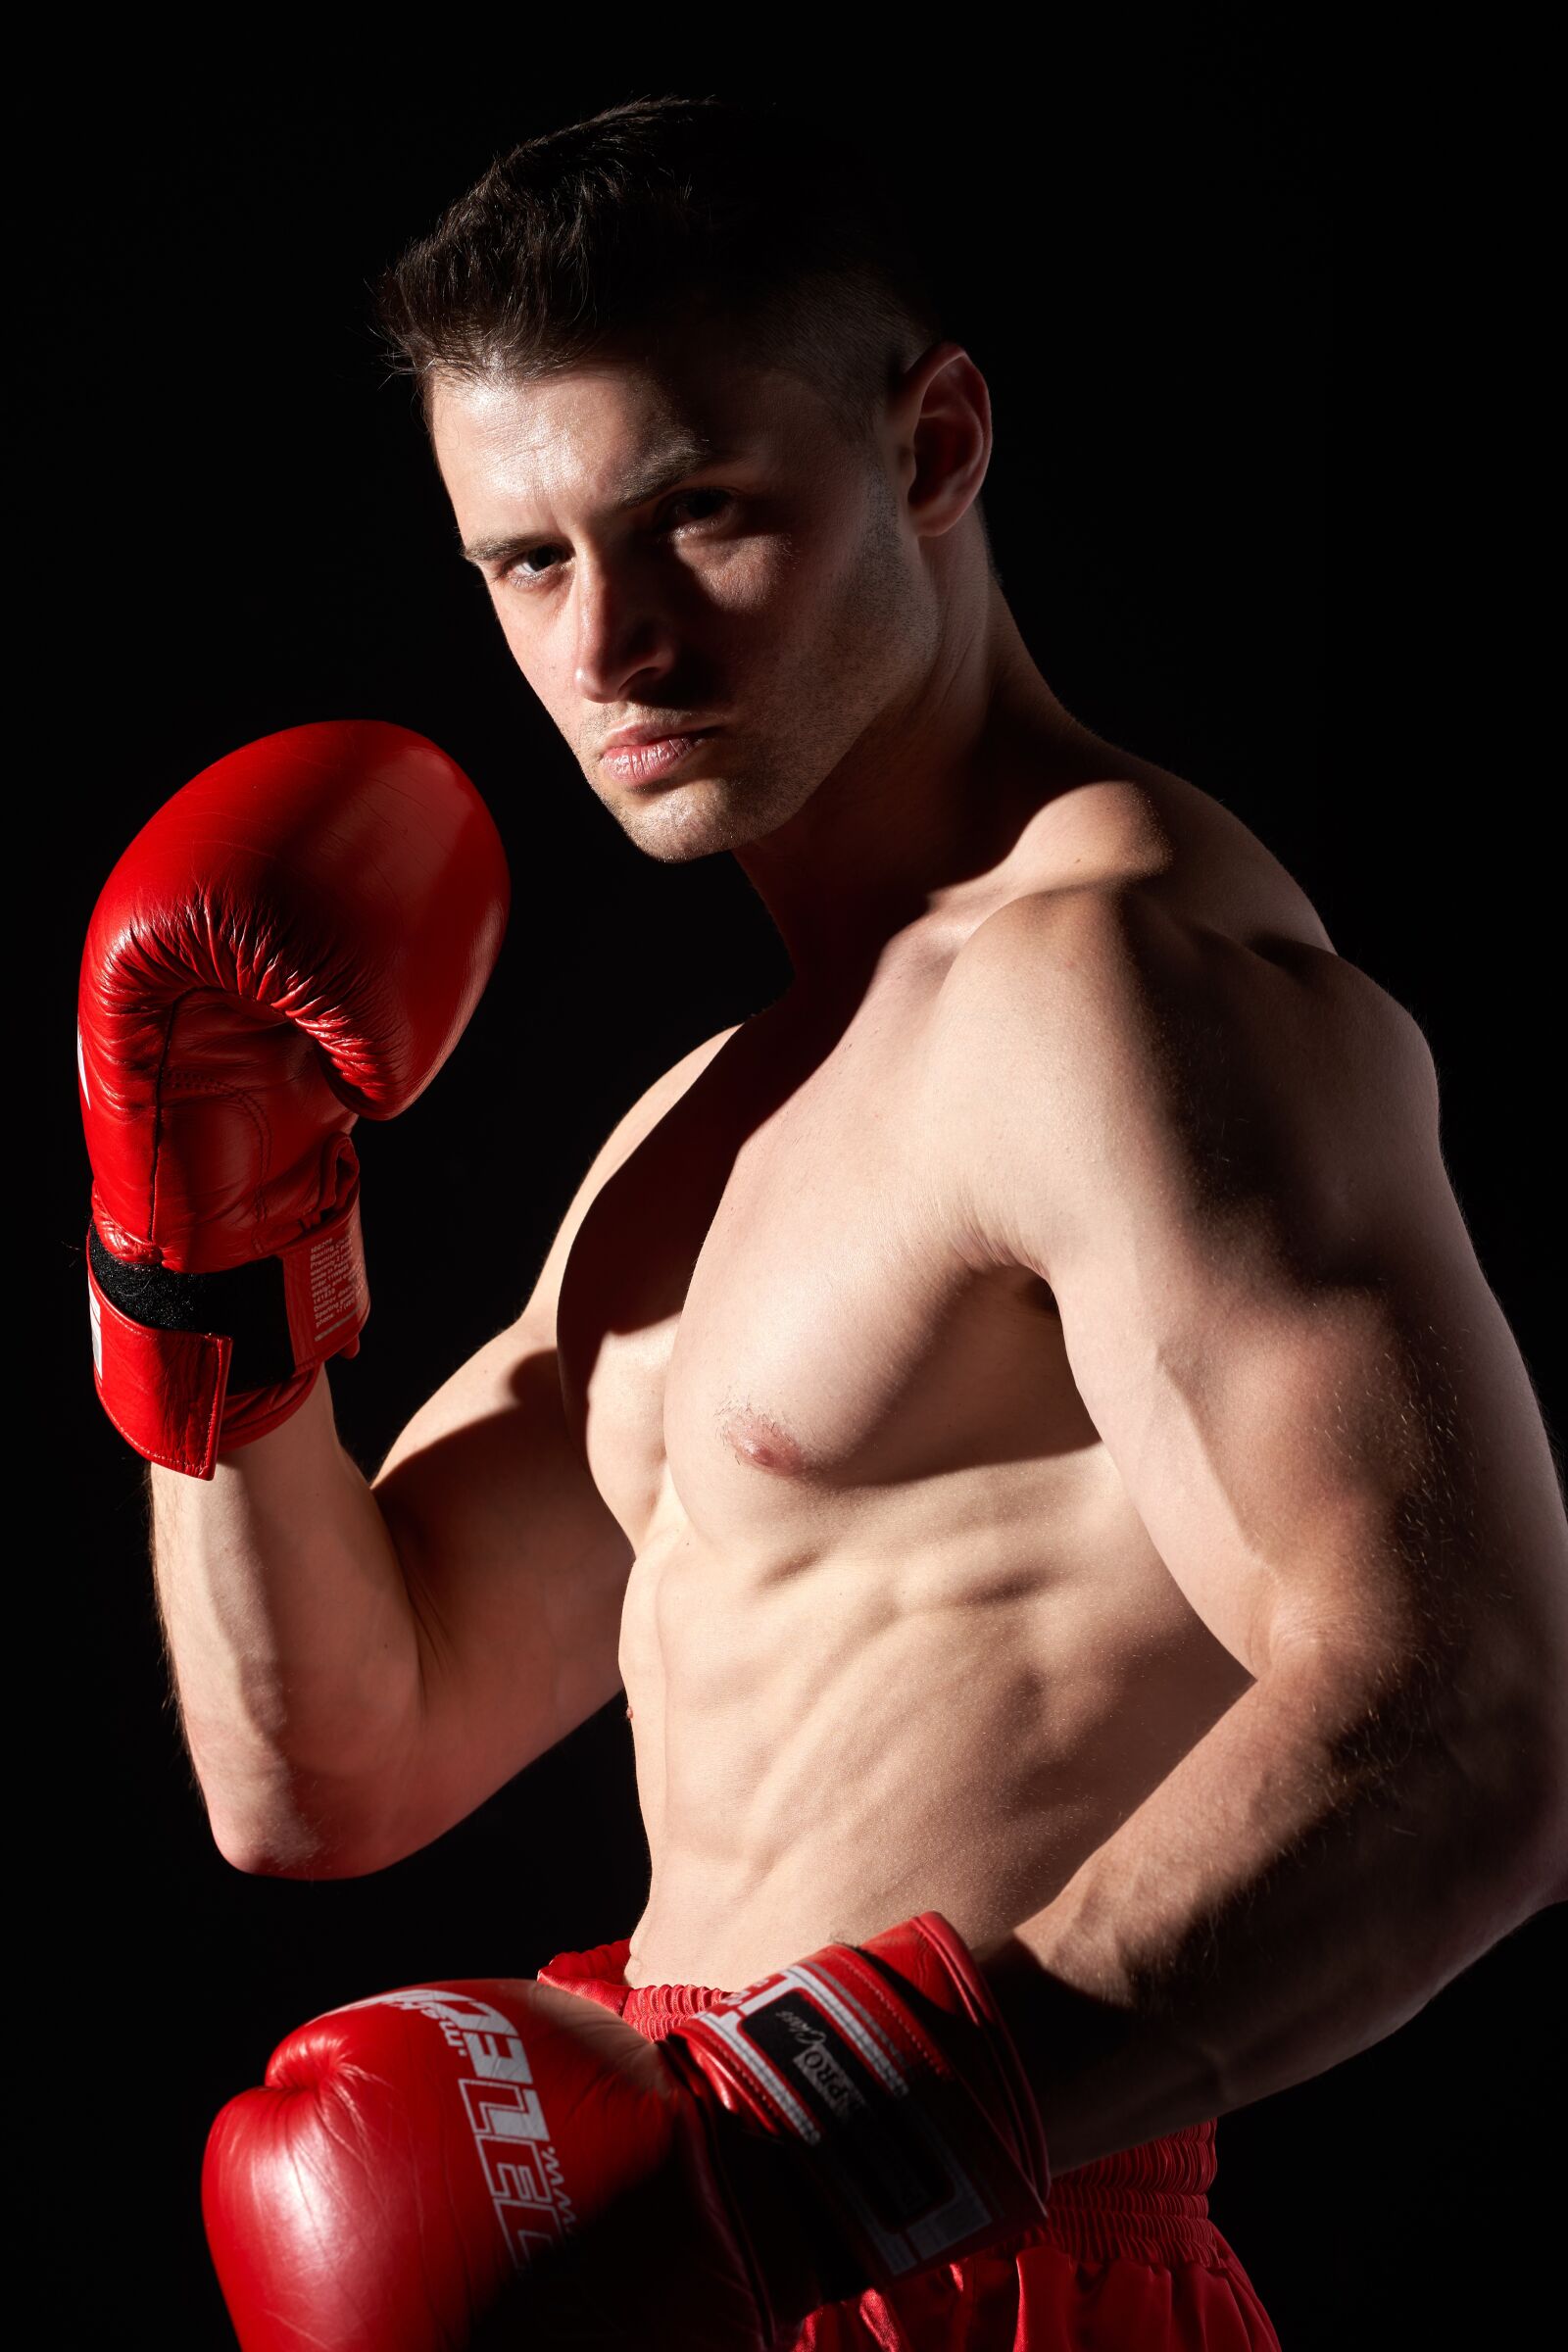 DT 100mm F2.8 SAM sample photo. Boxing, sport, sports photography